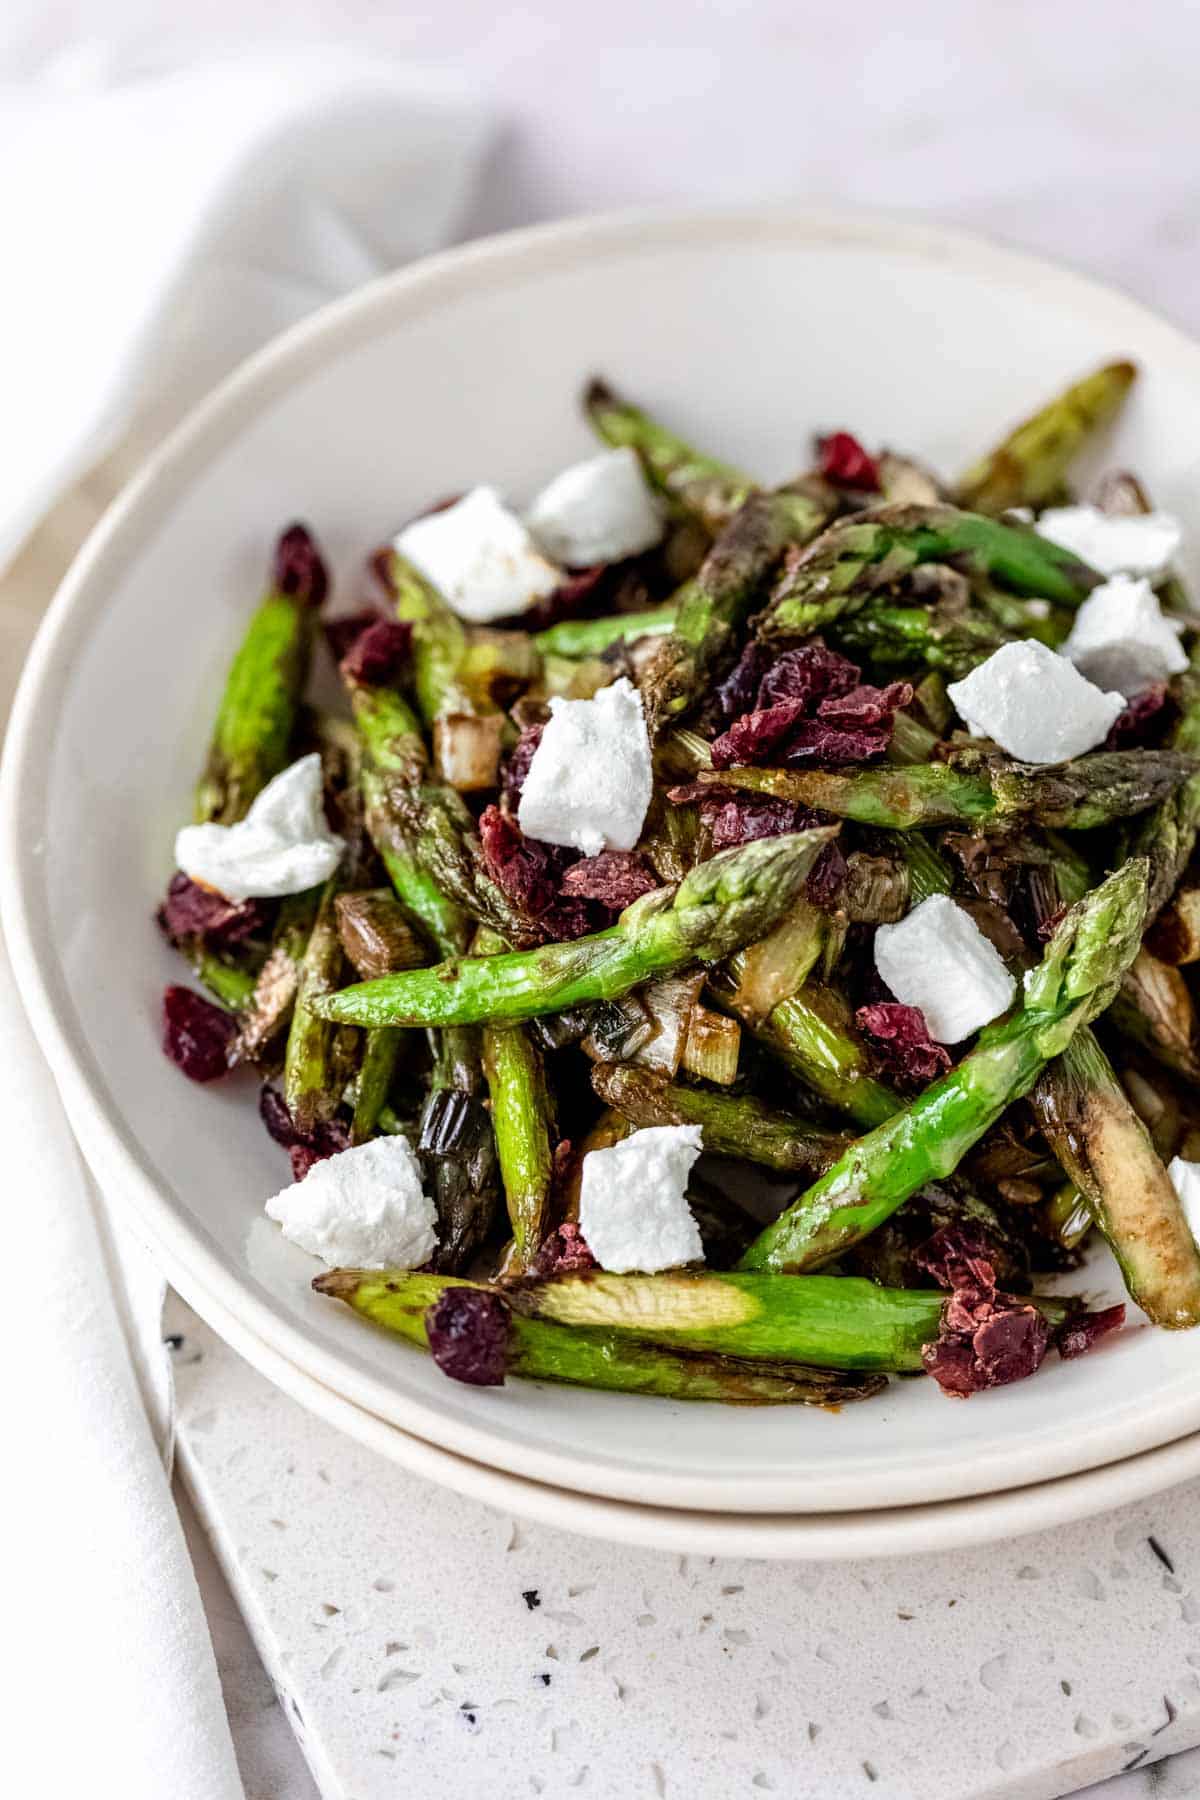 Roasted asparagus salad in a white bowl topped with chunks of goat cheese and dried cherries.